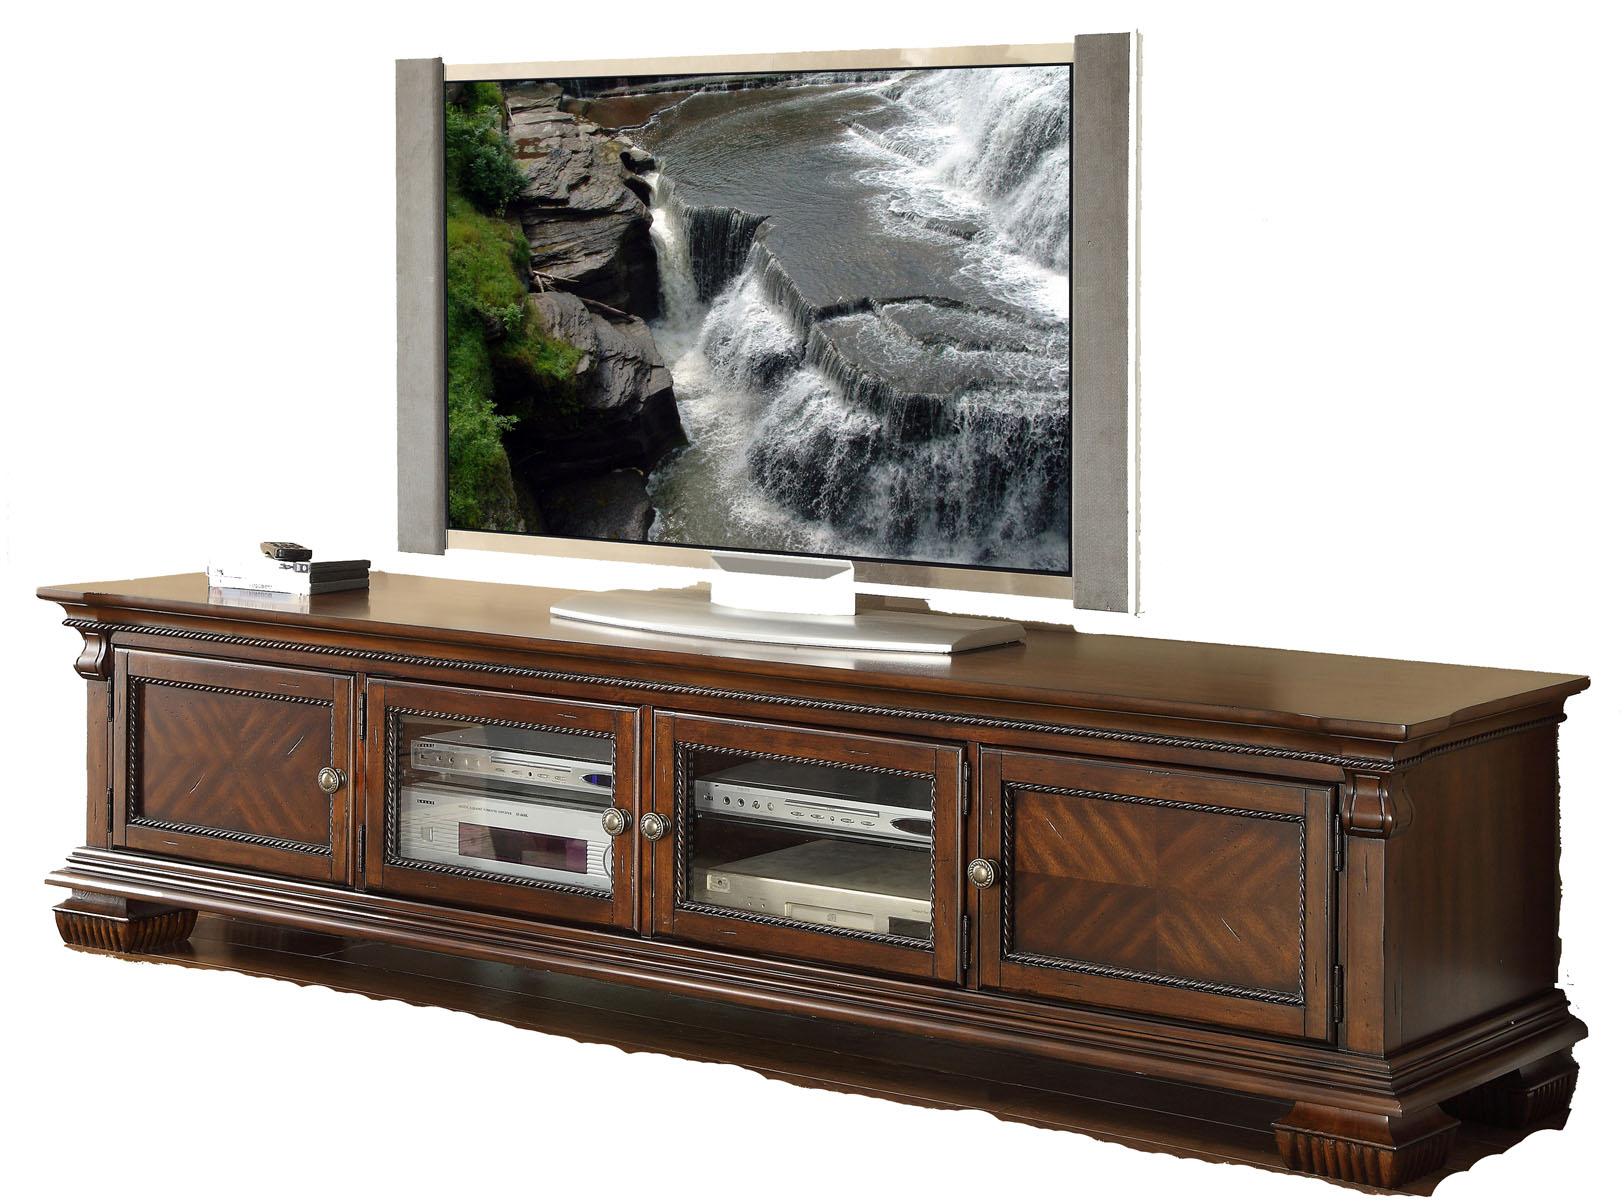 Fireplace Tv Stand Amazon New Tv Stands Inspirational Led Fireplace Tv Stand